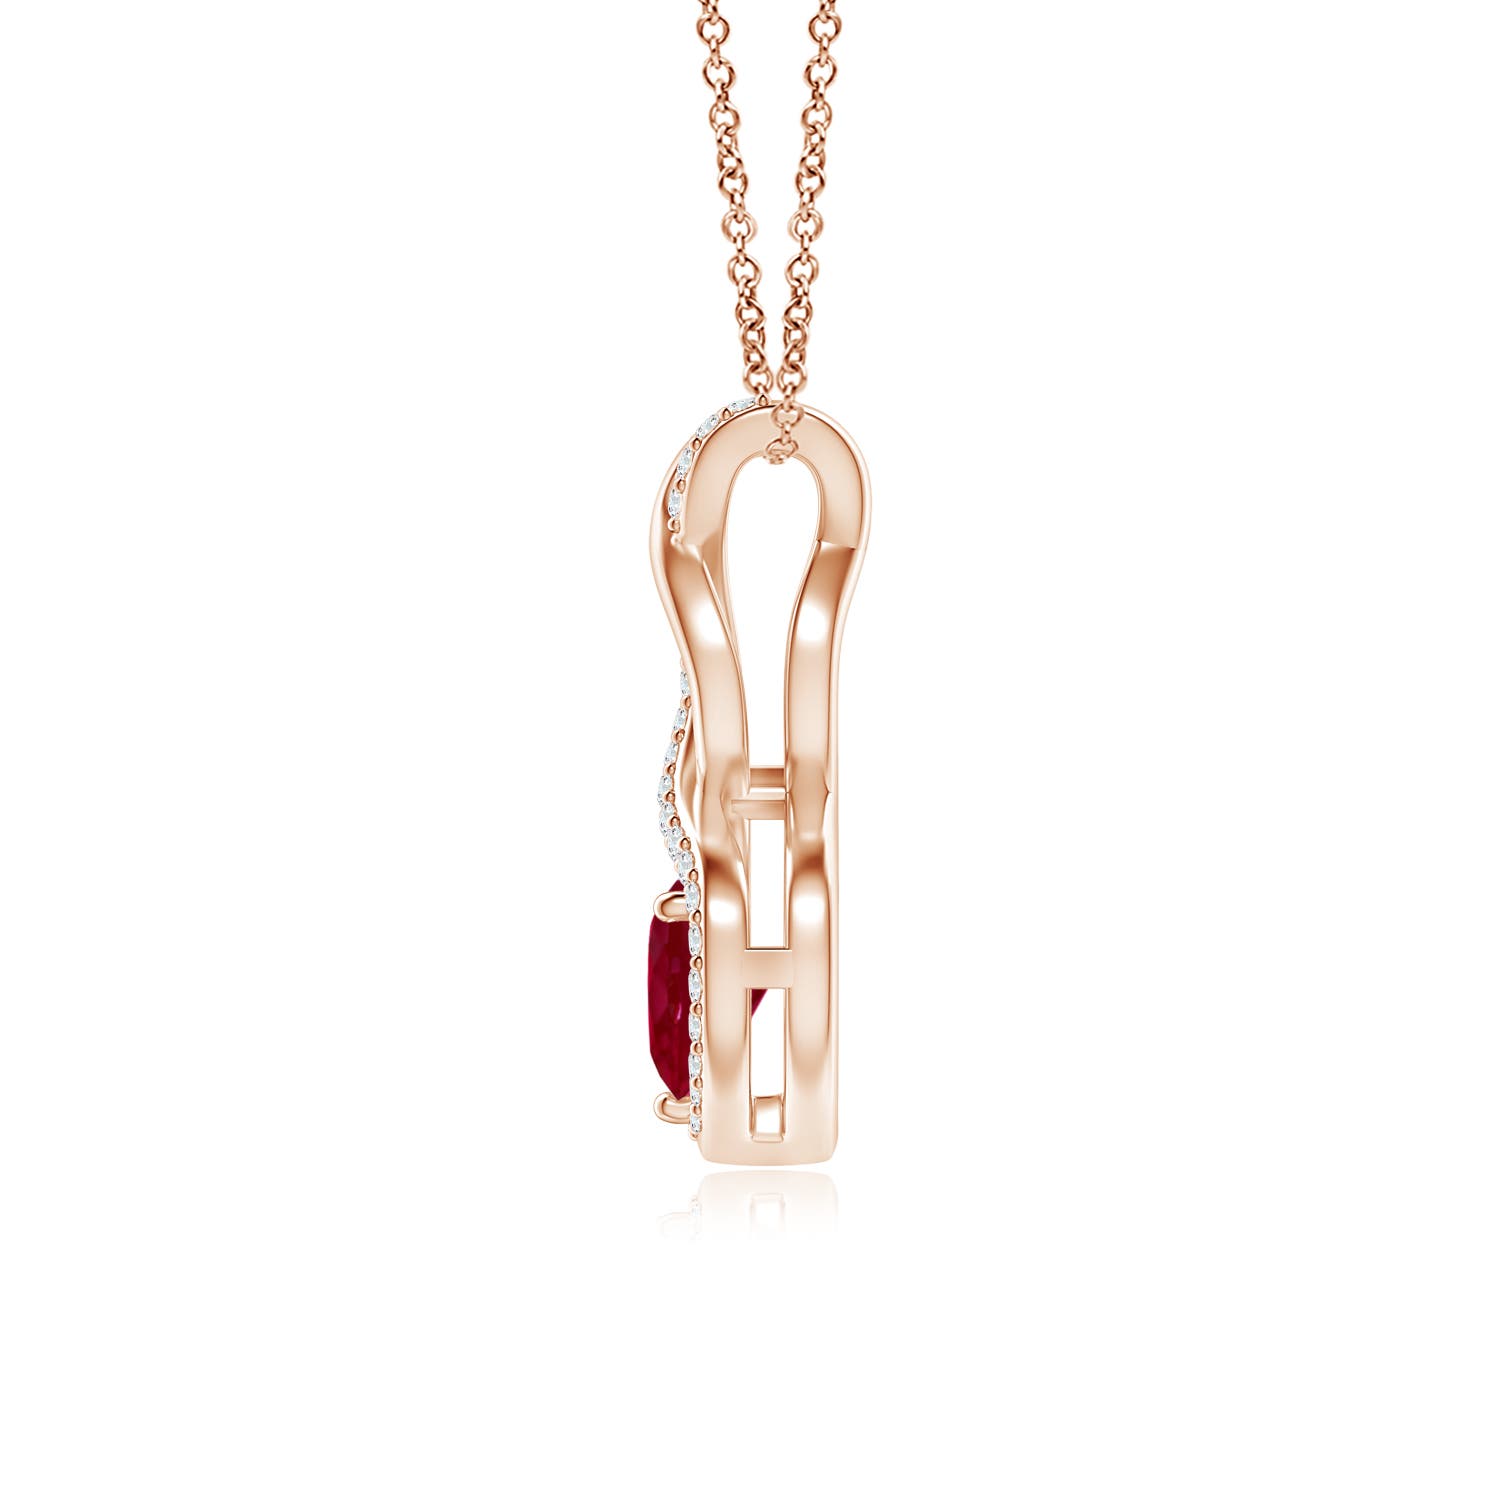 AA - Ruby / 0.61 CT / 14 KT Rose Gold